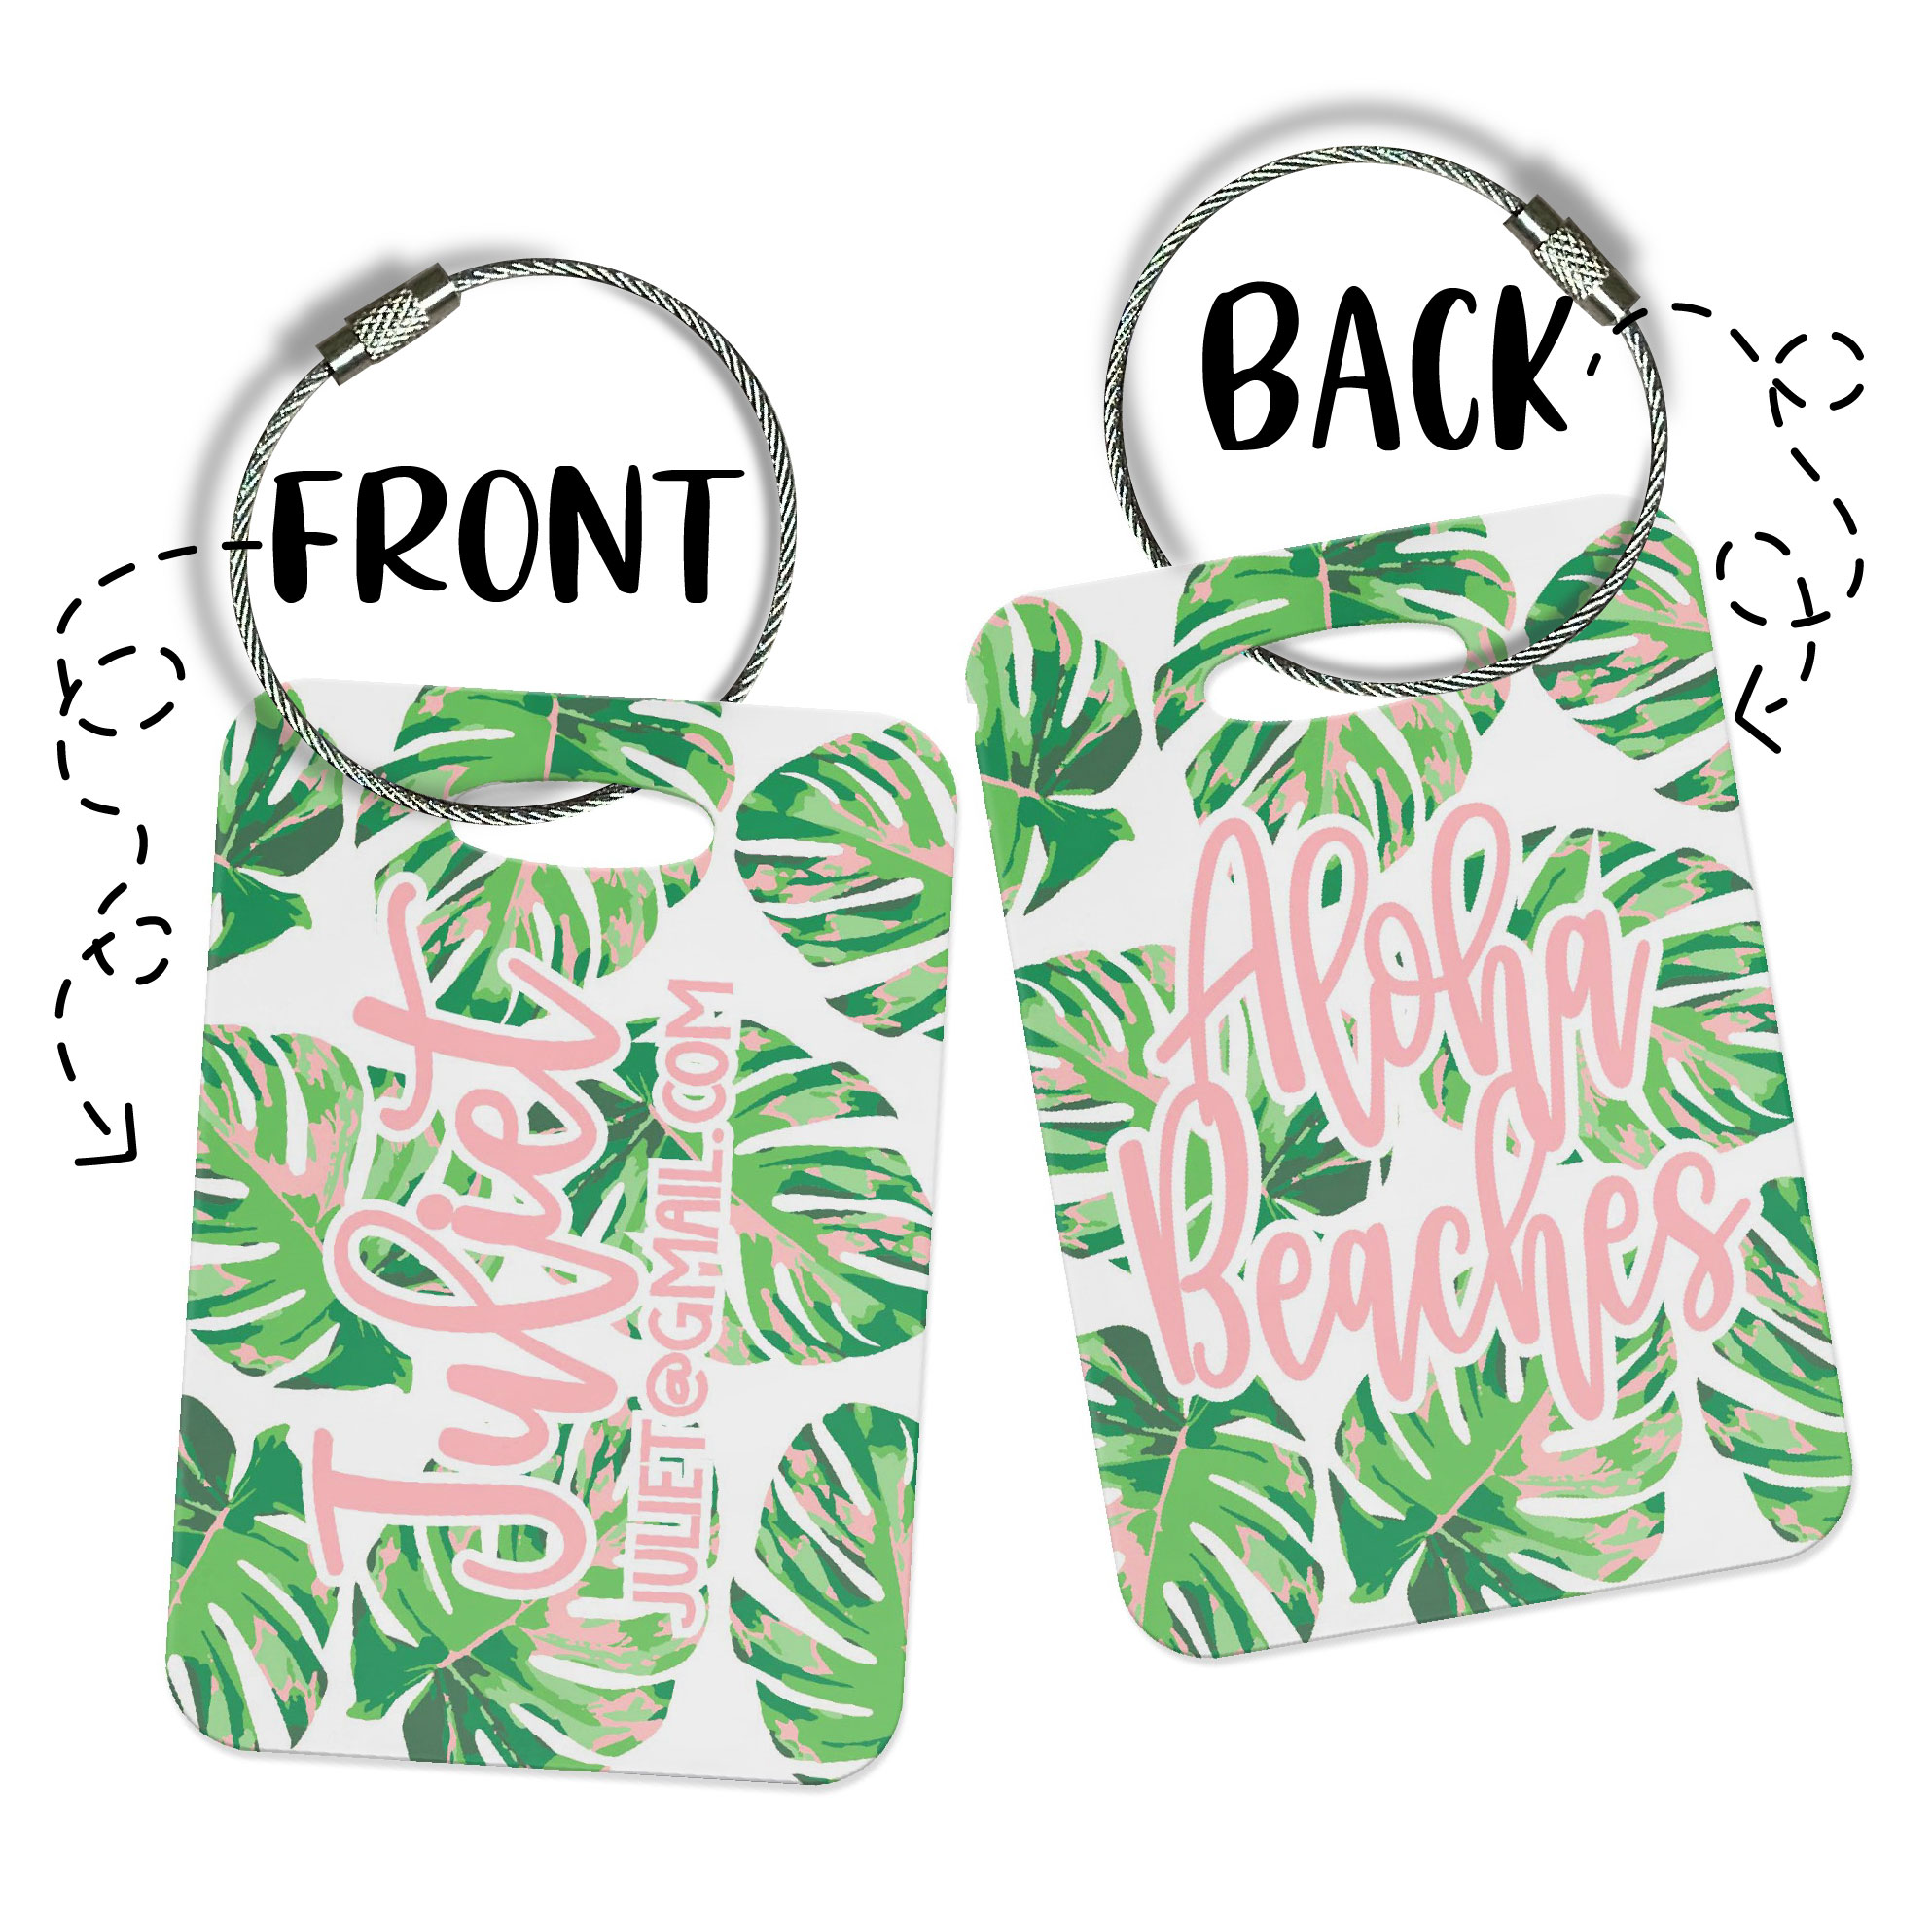 Personalized Luggage Bag Tag - Pink Tropical - Aloha Beaches